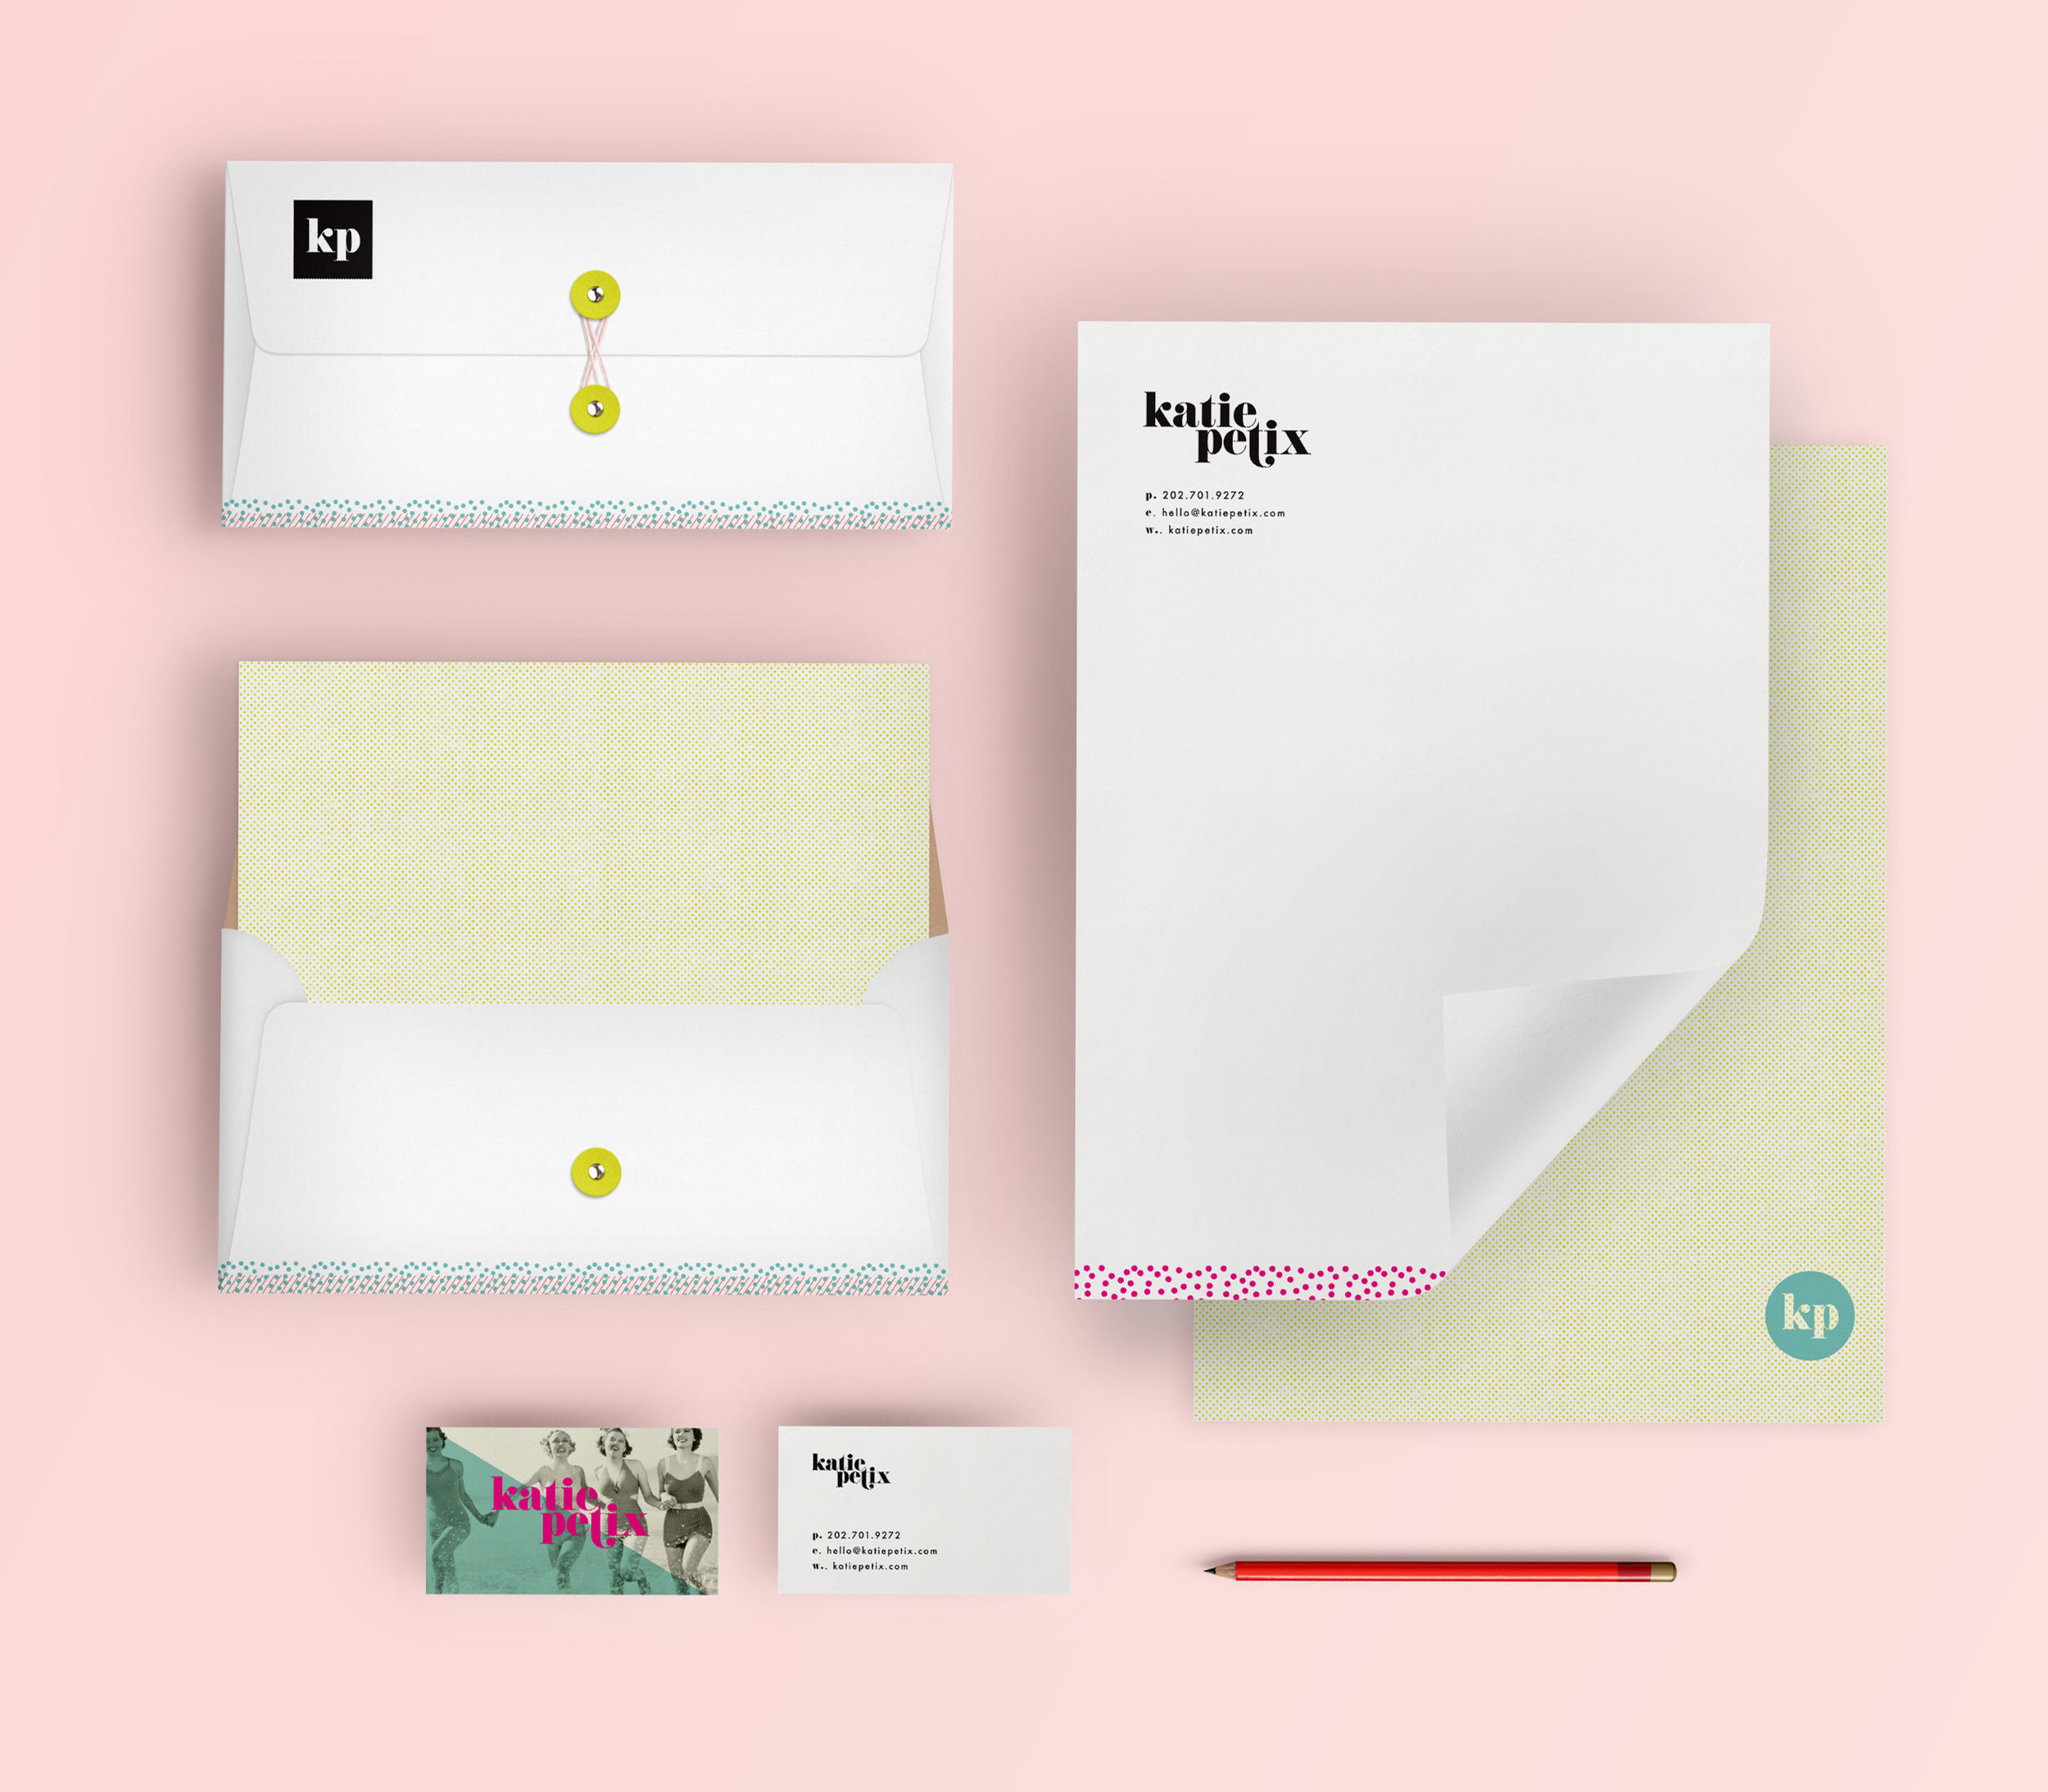 Colorful Neon Stationery Design for Social Media Manager Katie Petix